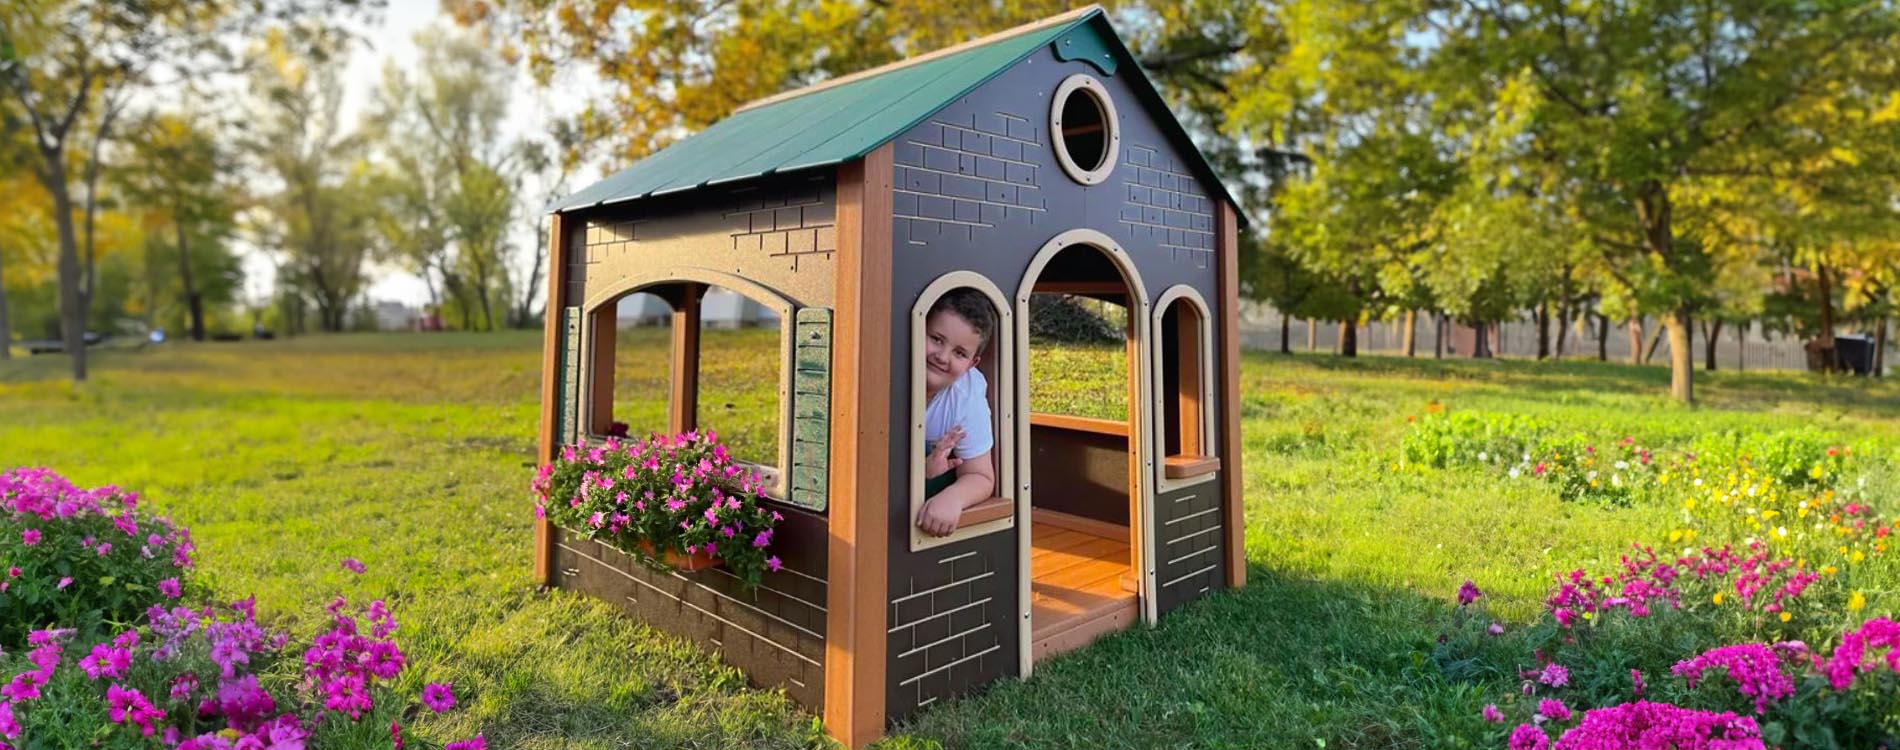 Dramatic Playhouse For Toddlers & Preschoolers